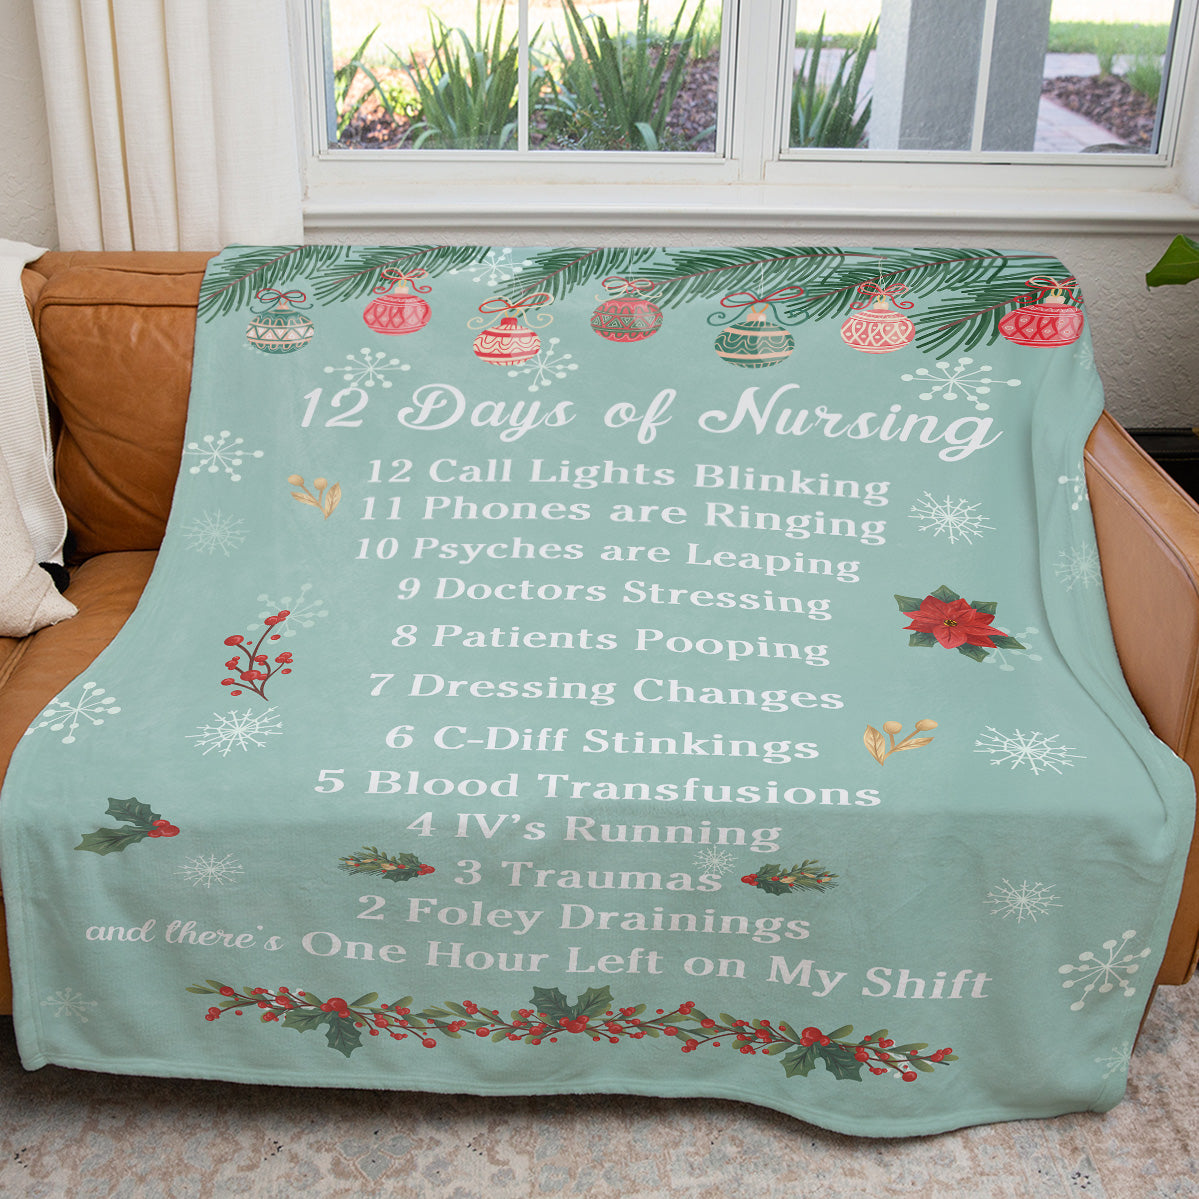 12 Days of Christmas Nursing Style Blanket, Funny Nurse Blanket Christmas Gift Ideas, Birthday Gift Ideas for Nurse Mom Daughter Wife